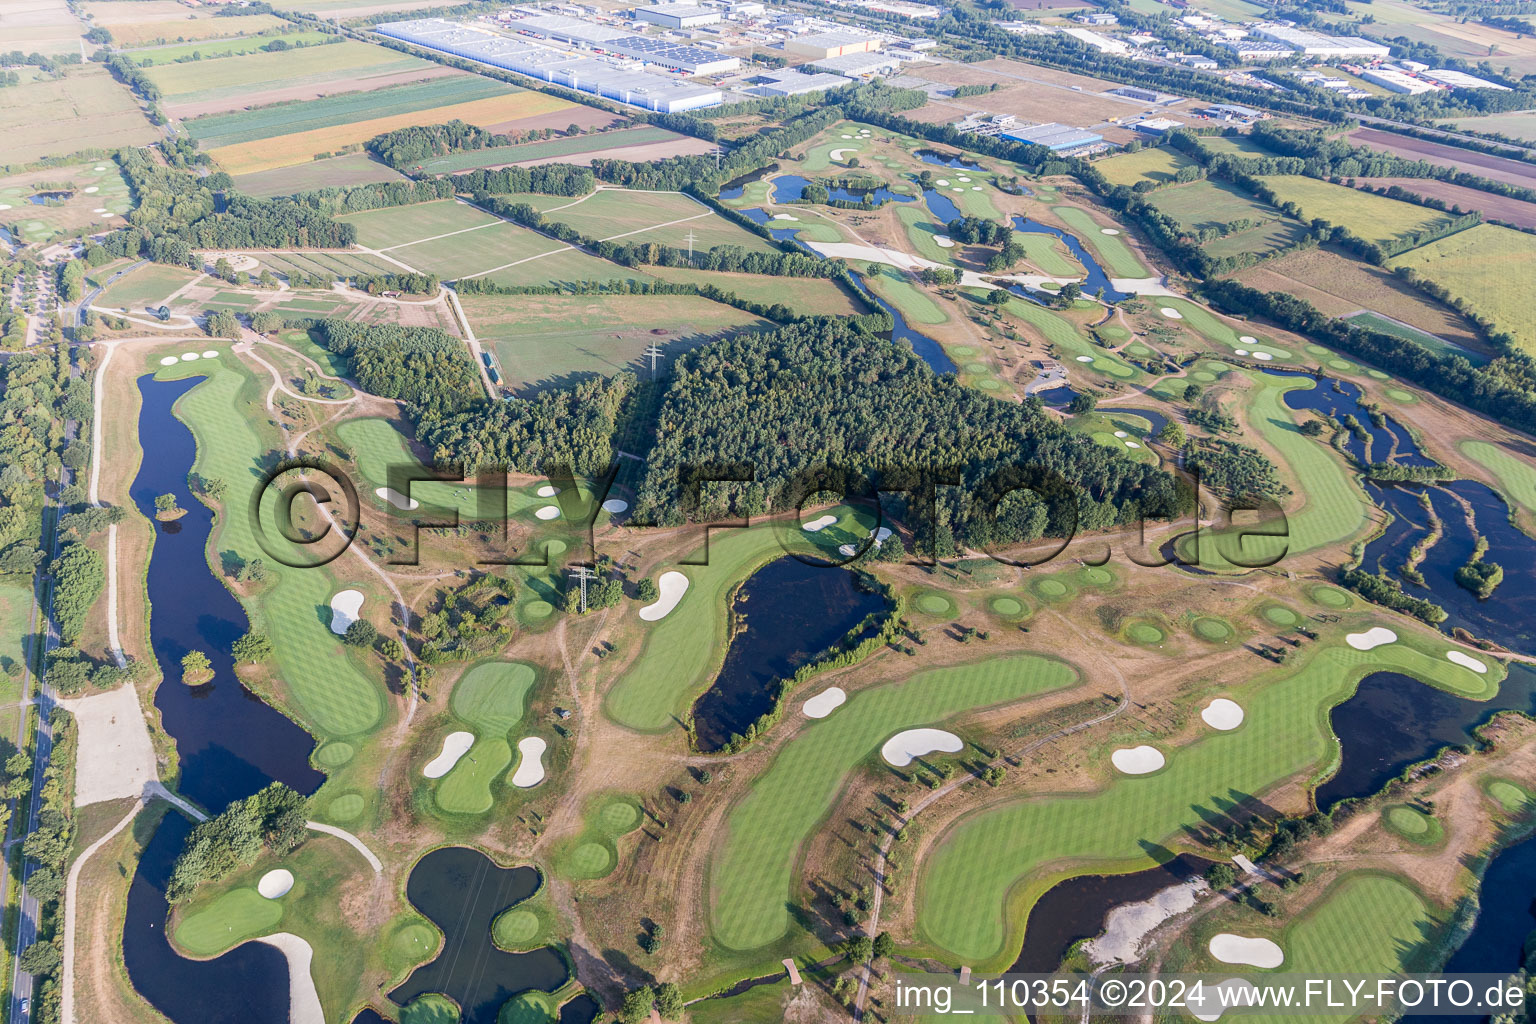 Bird's eye view of Grounds of the Golf course at Green Eagle Golf Courses in Winsen (Luhe) in the state Lower Saxony, Germany